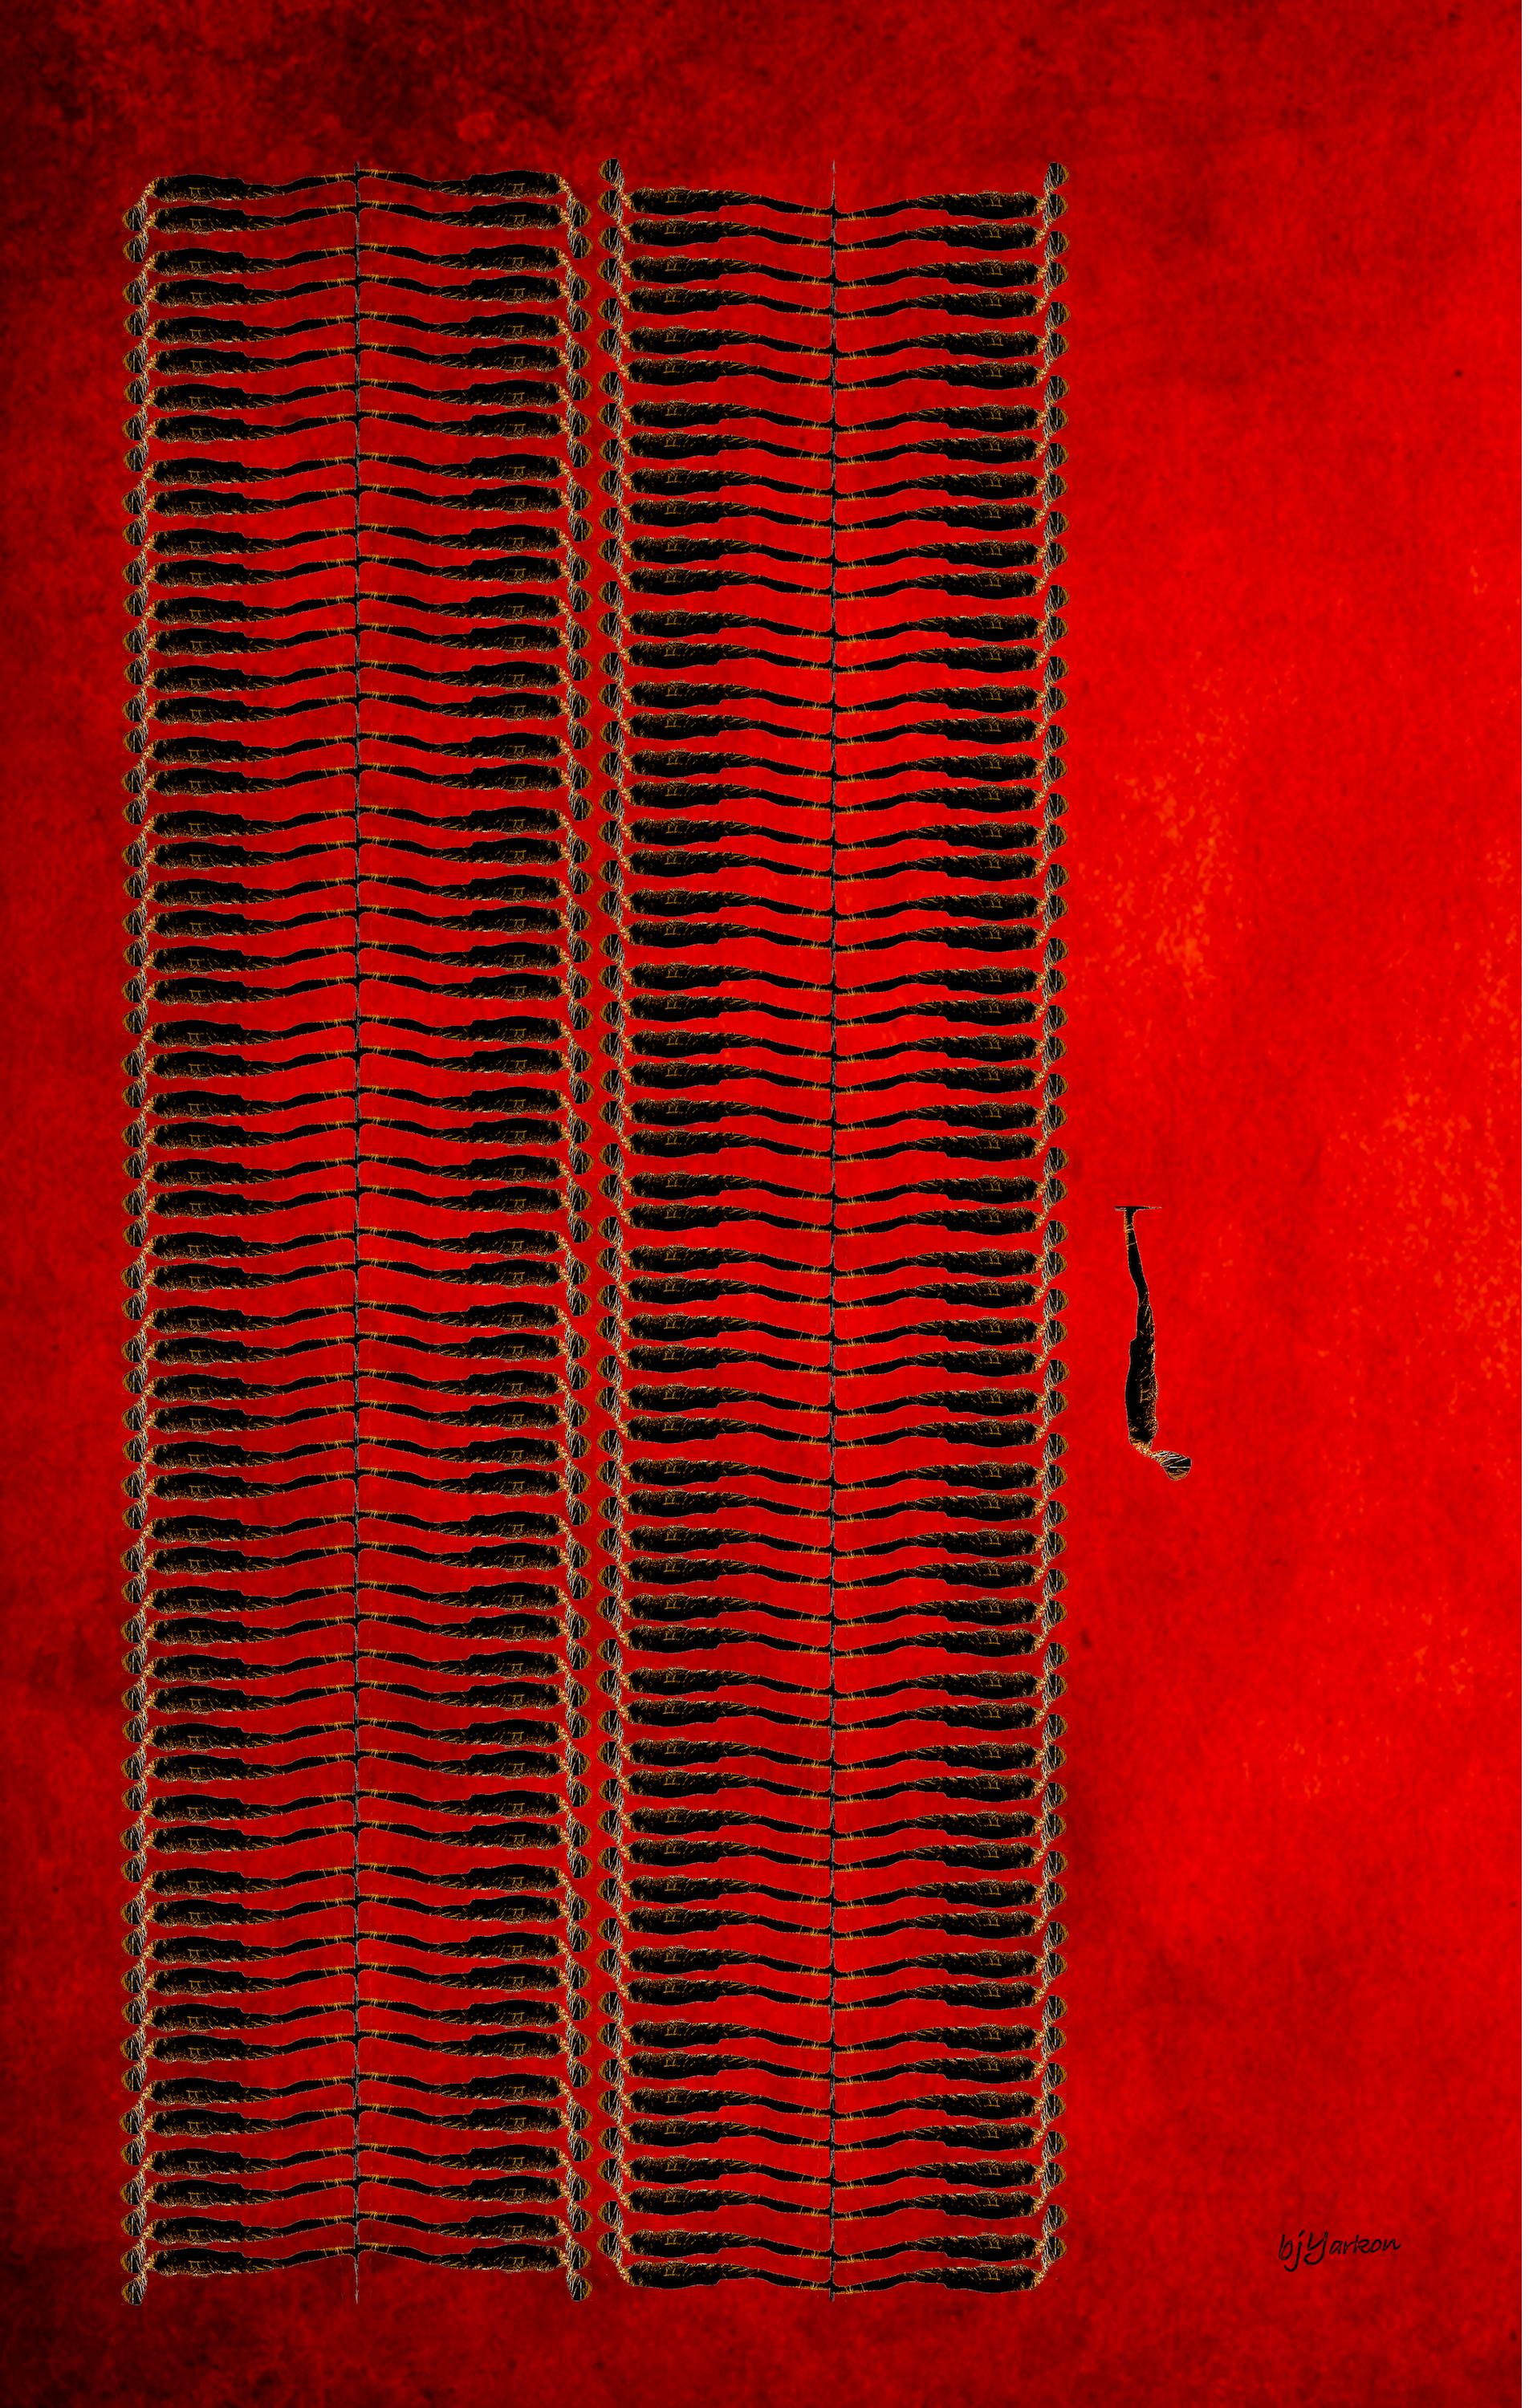 Image composed two vertical columns of stacked horizontal figures, left; and one inverted vertical "falling" figure to the right; deep red and black background.